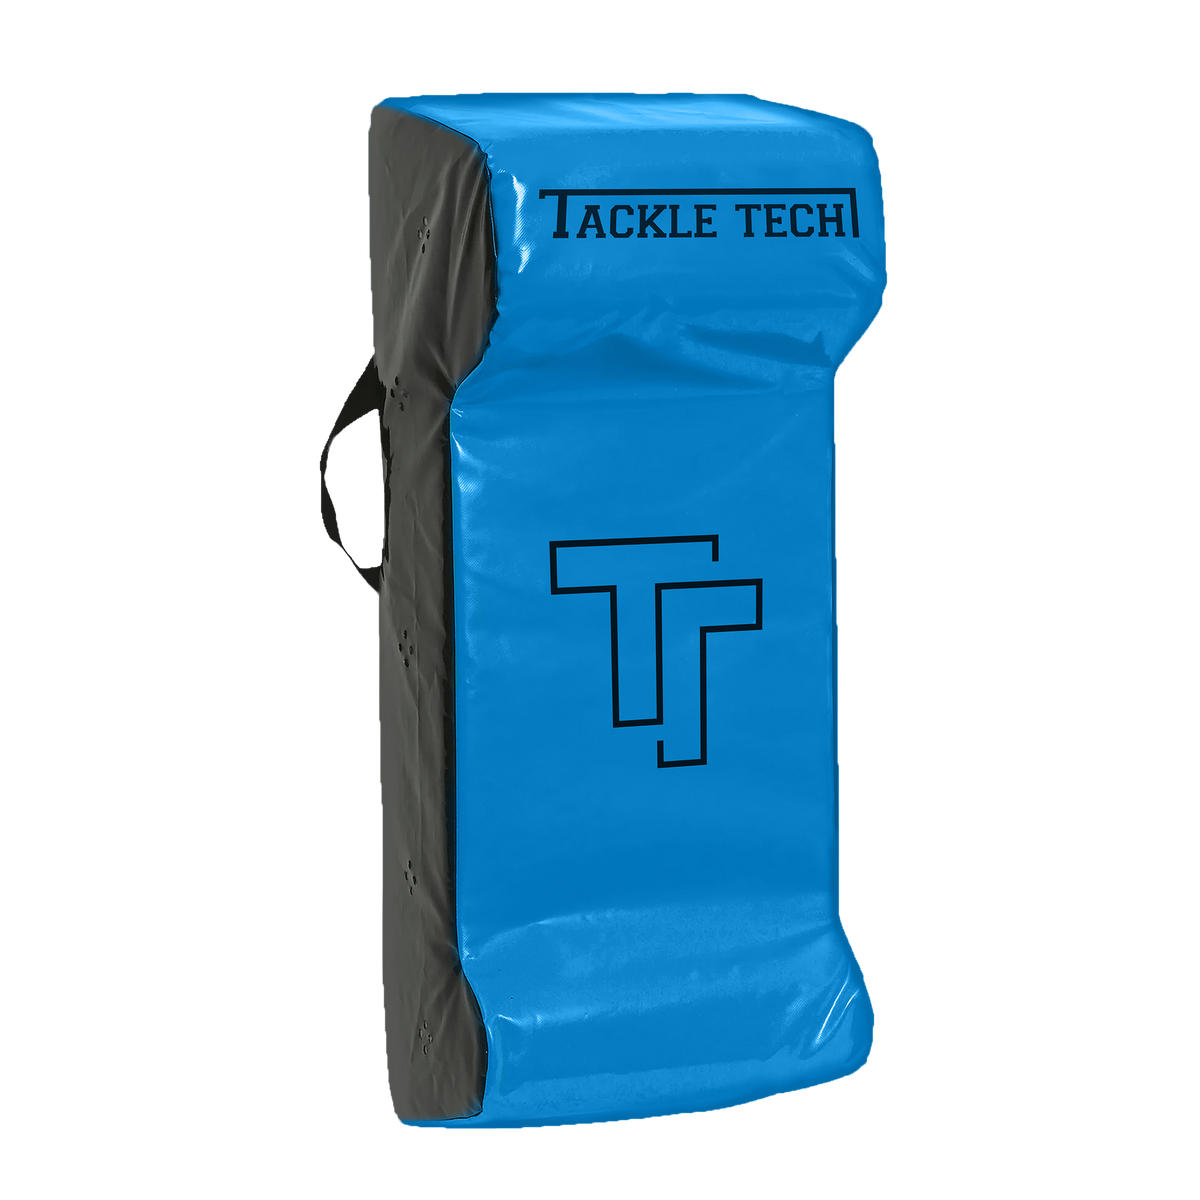 Tackle Tech Contact Shield - Club Series - Adult/Youth Sizing - Blue/Black